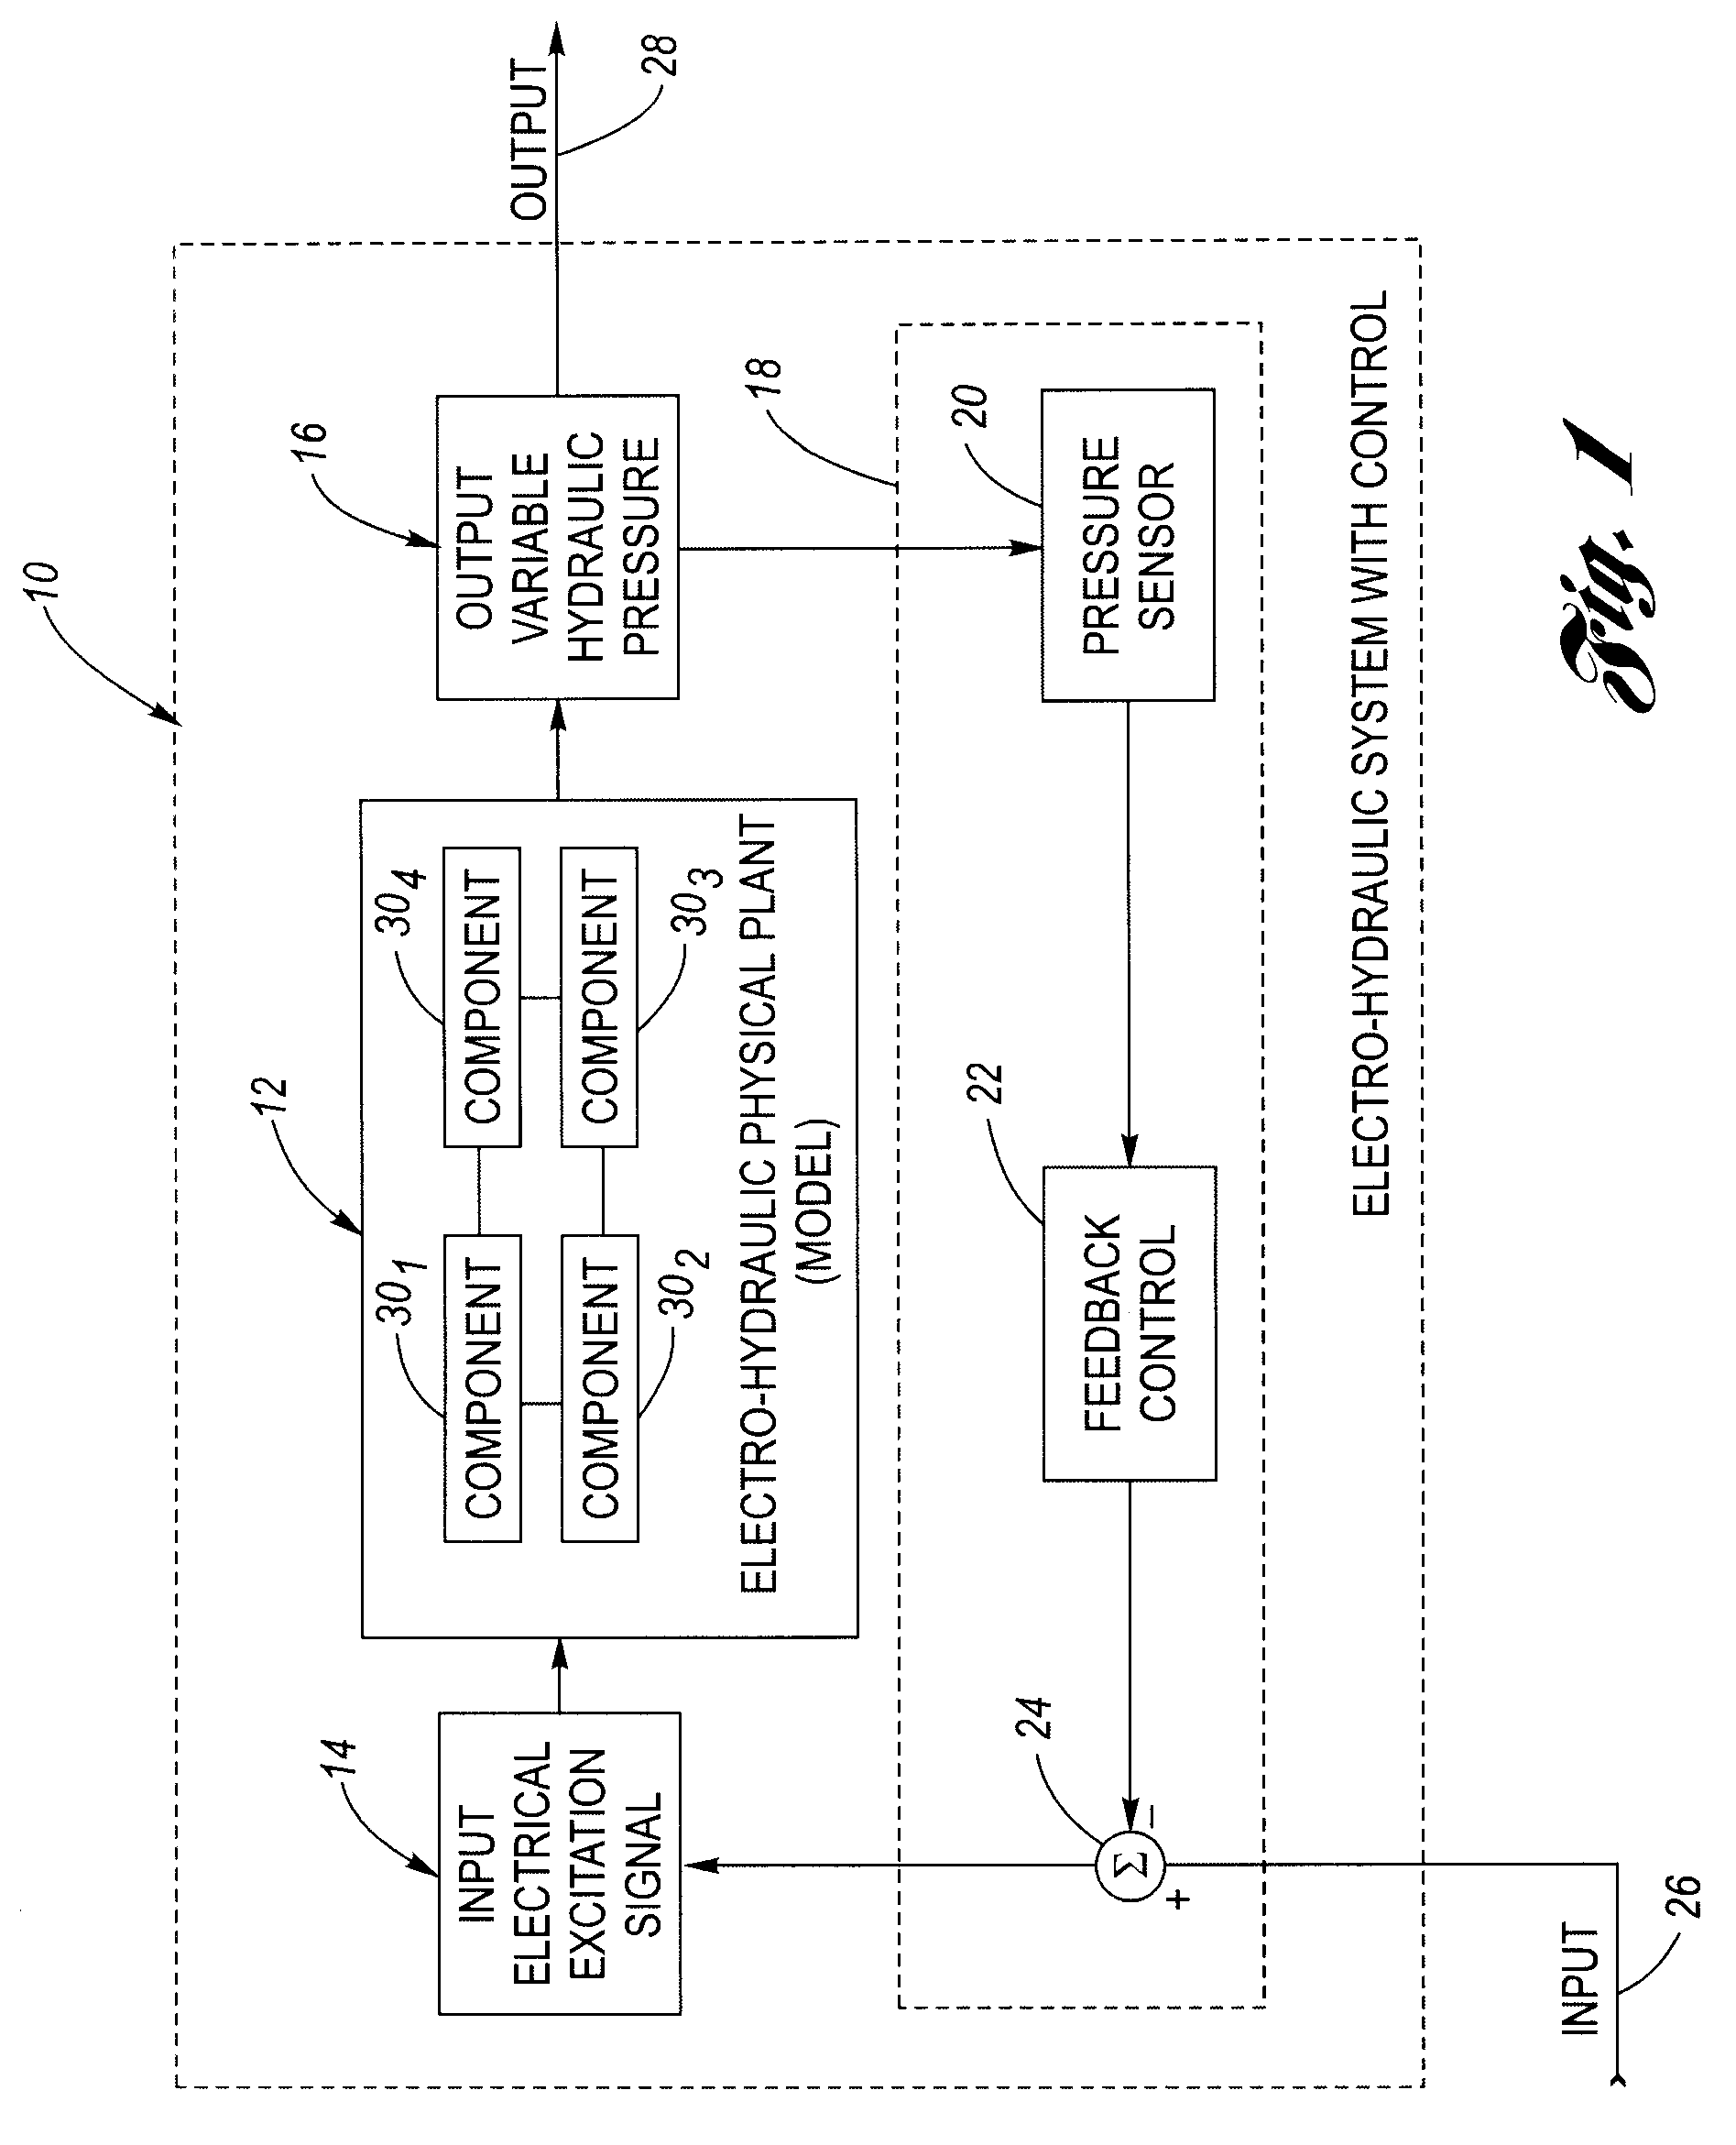 Method for generating an electro-hydraulic model for control design